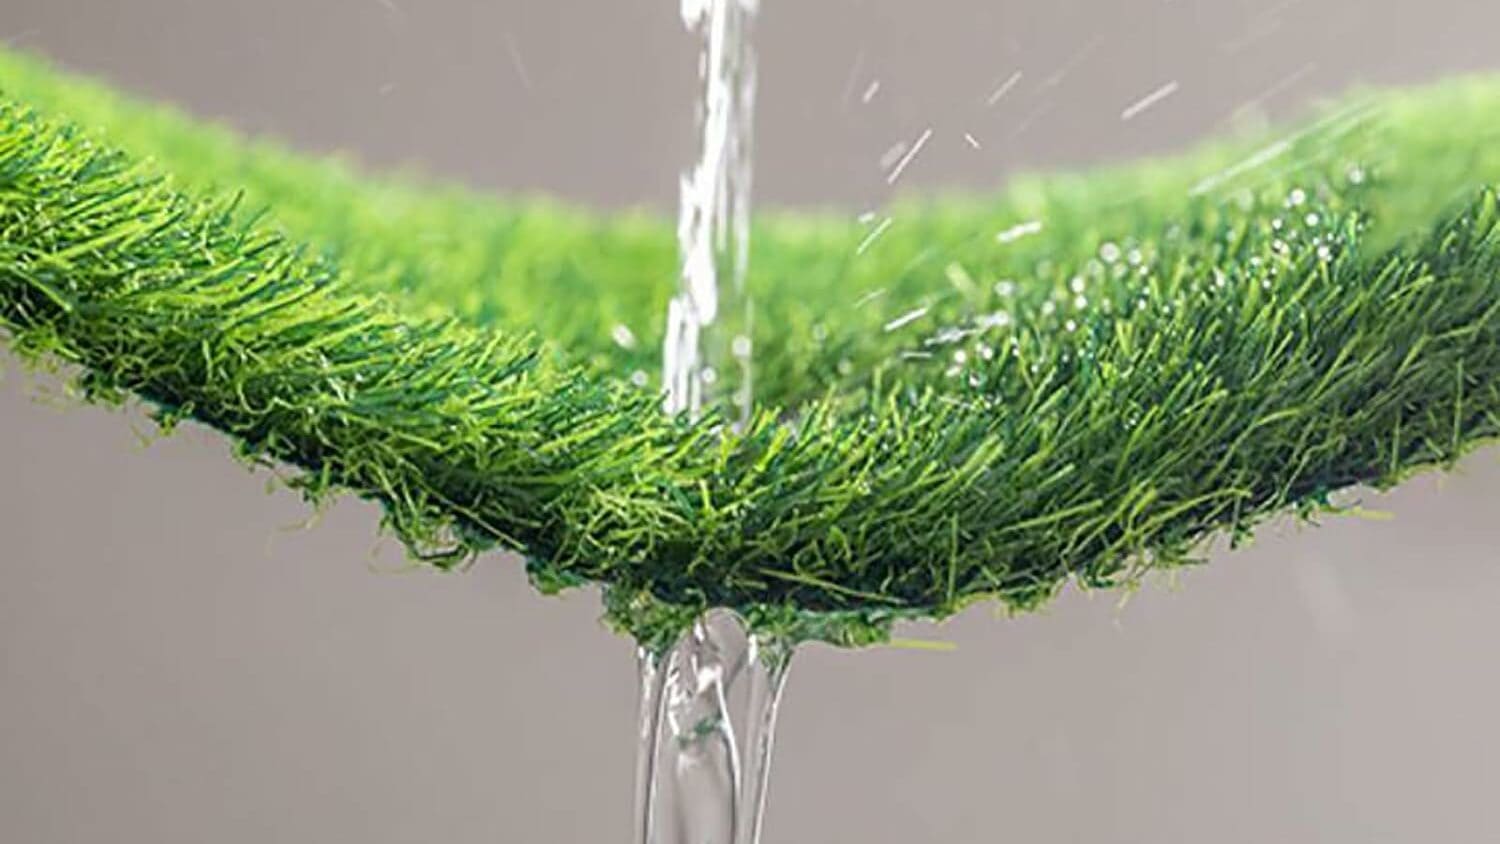 Water poured on artificial turf to show drainage